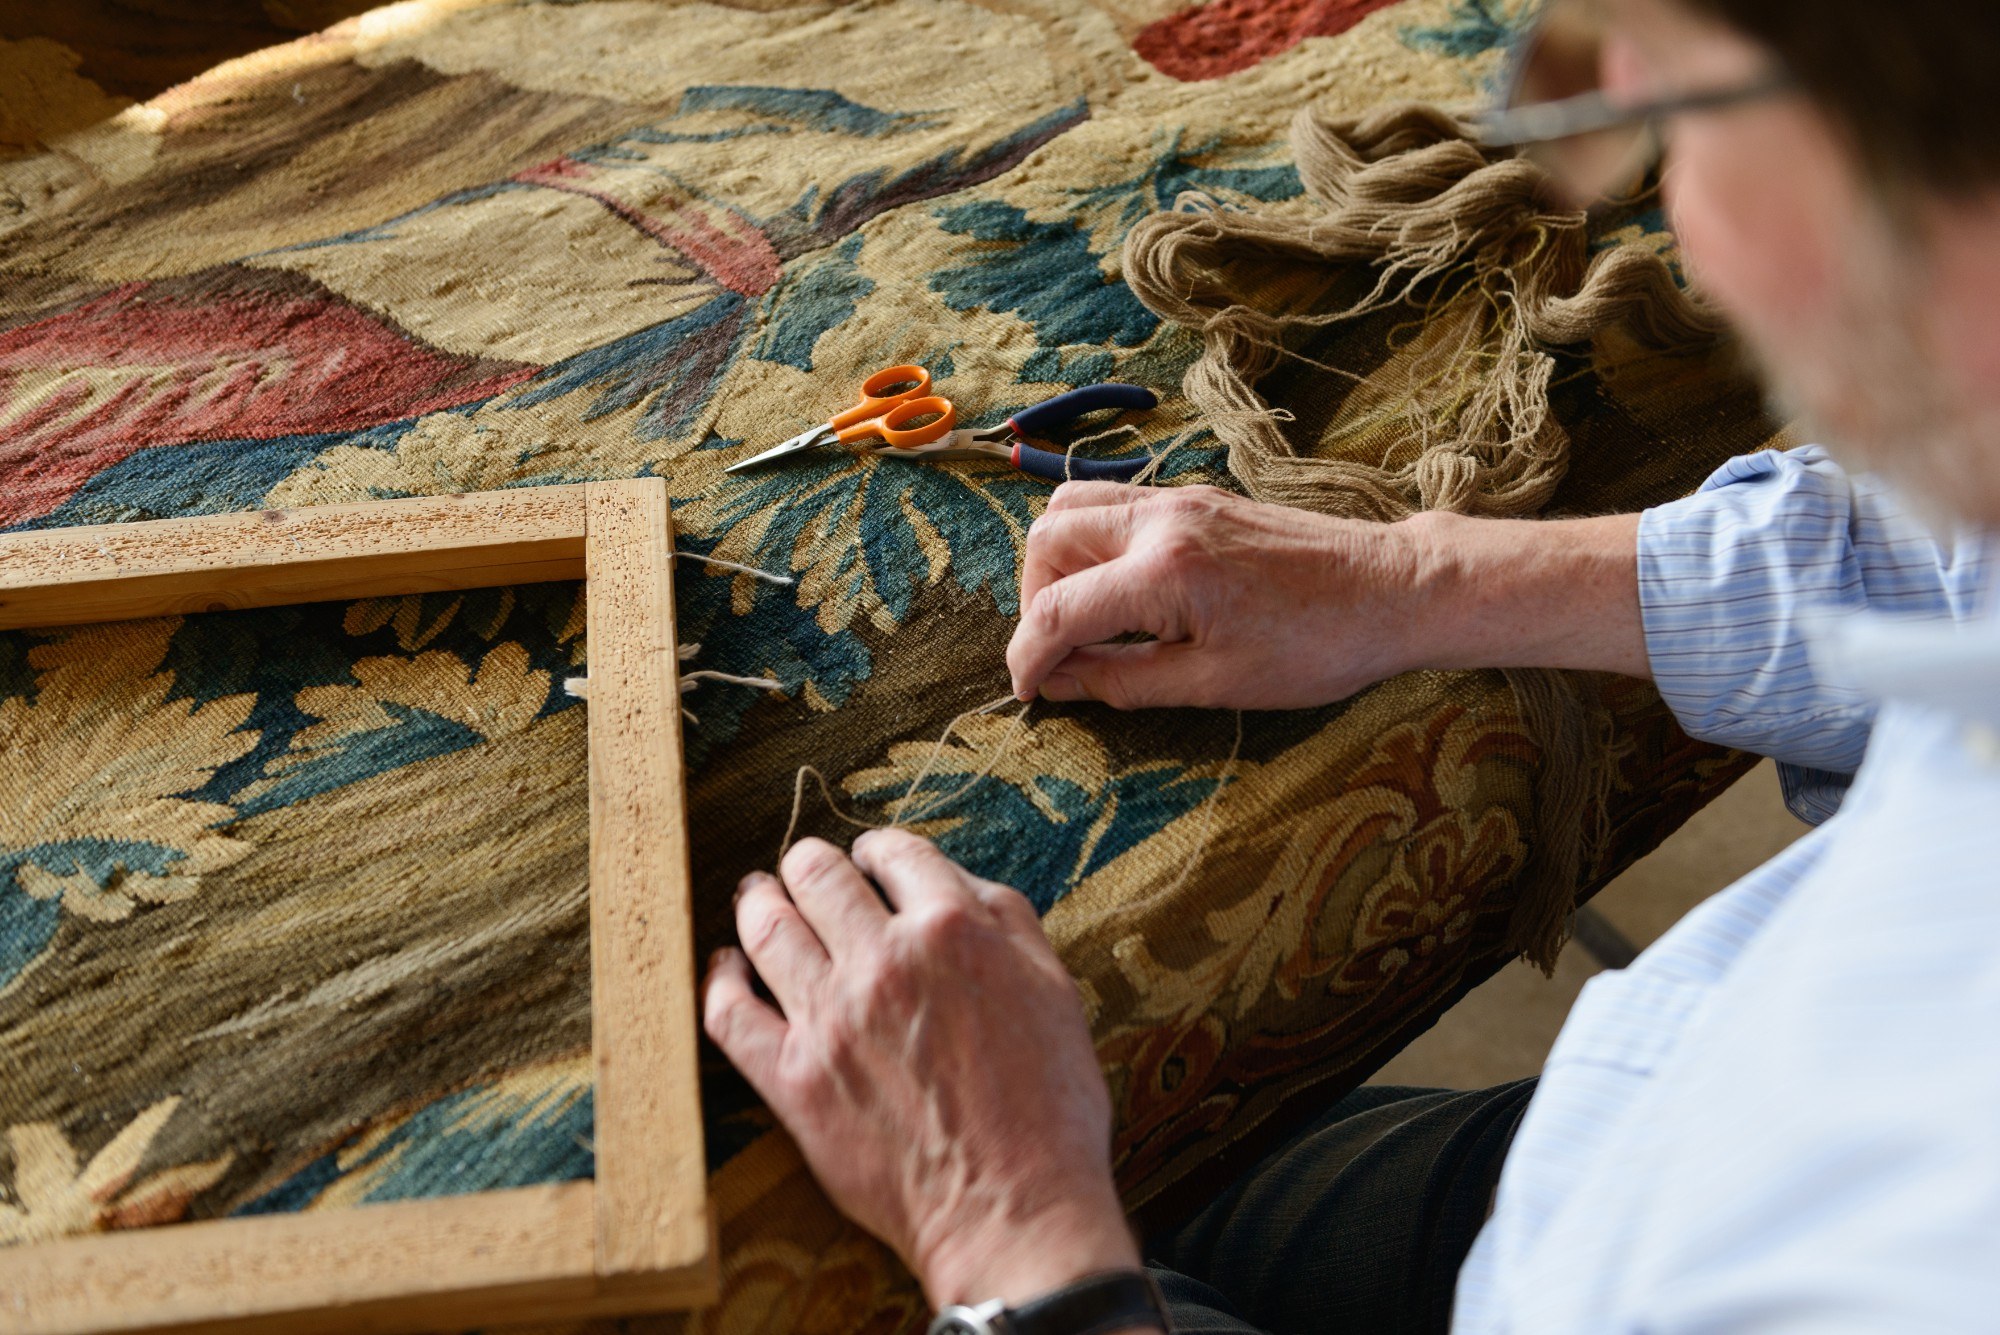 Man working on a tapestry